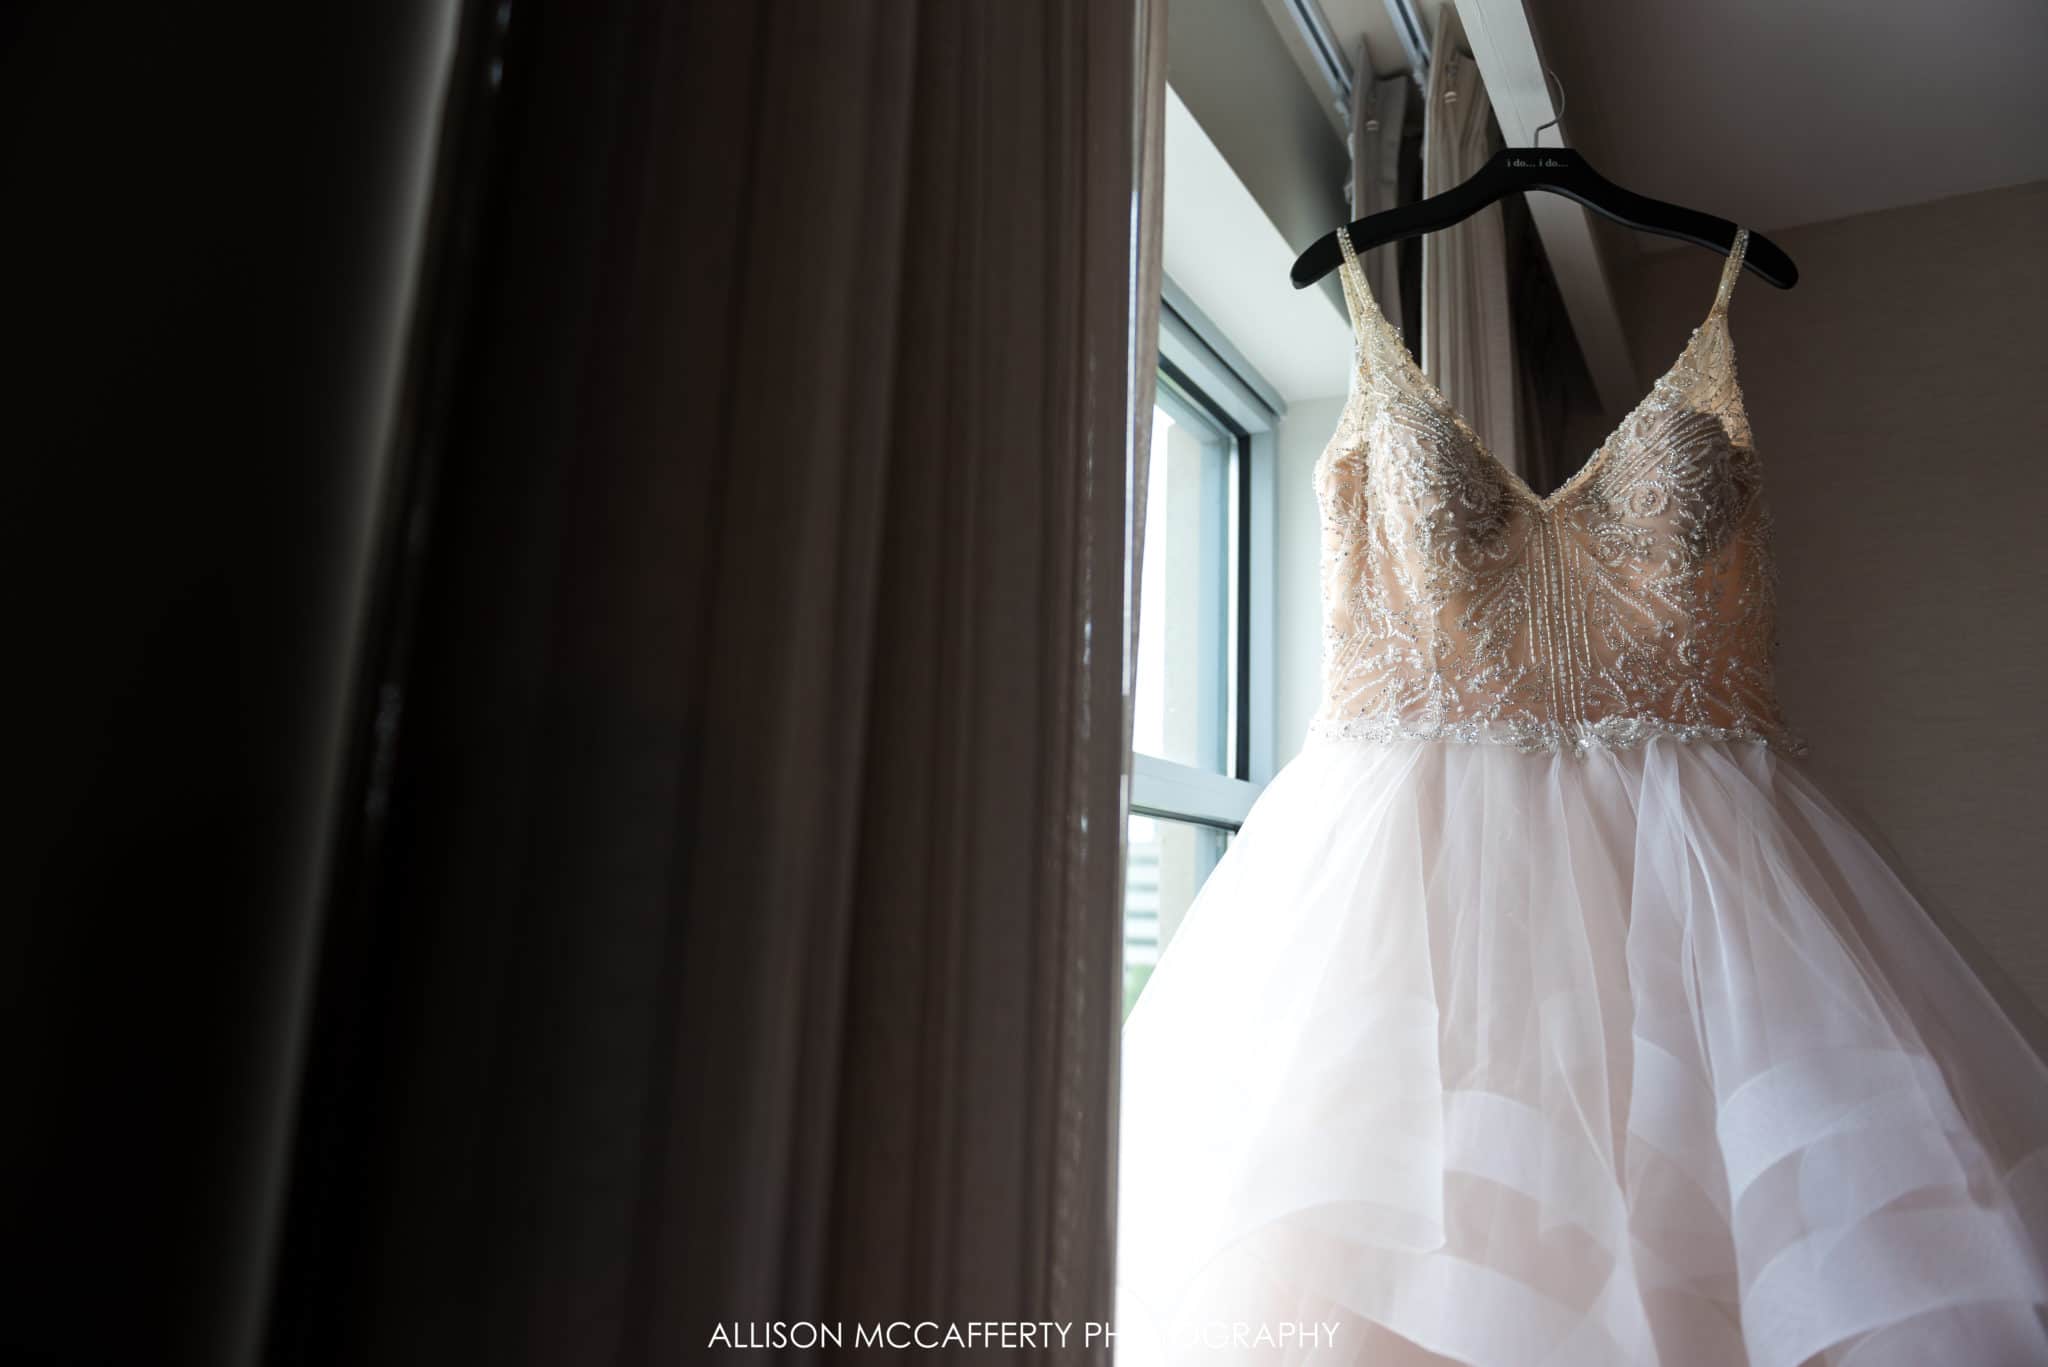 Wedding gown hanging in the window